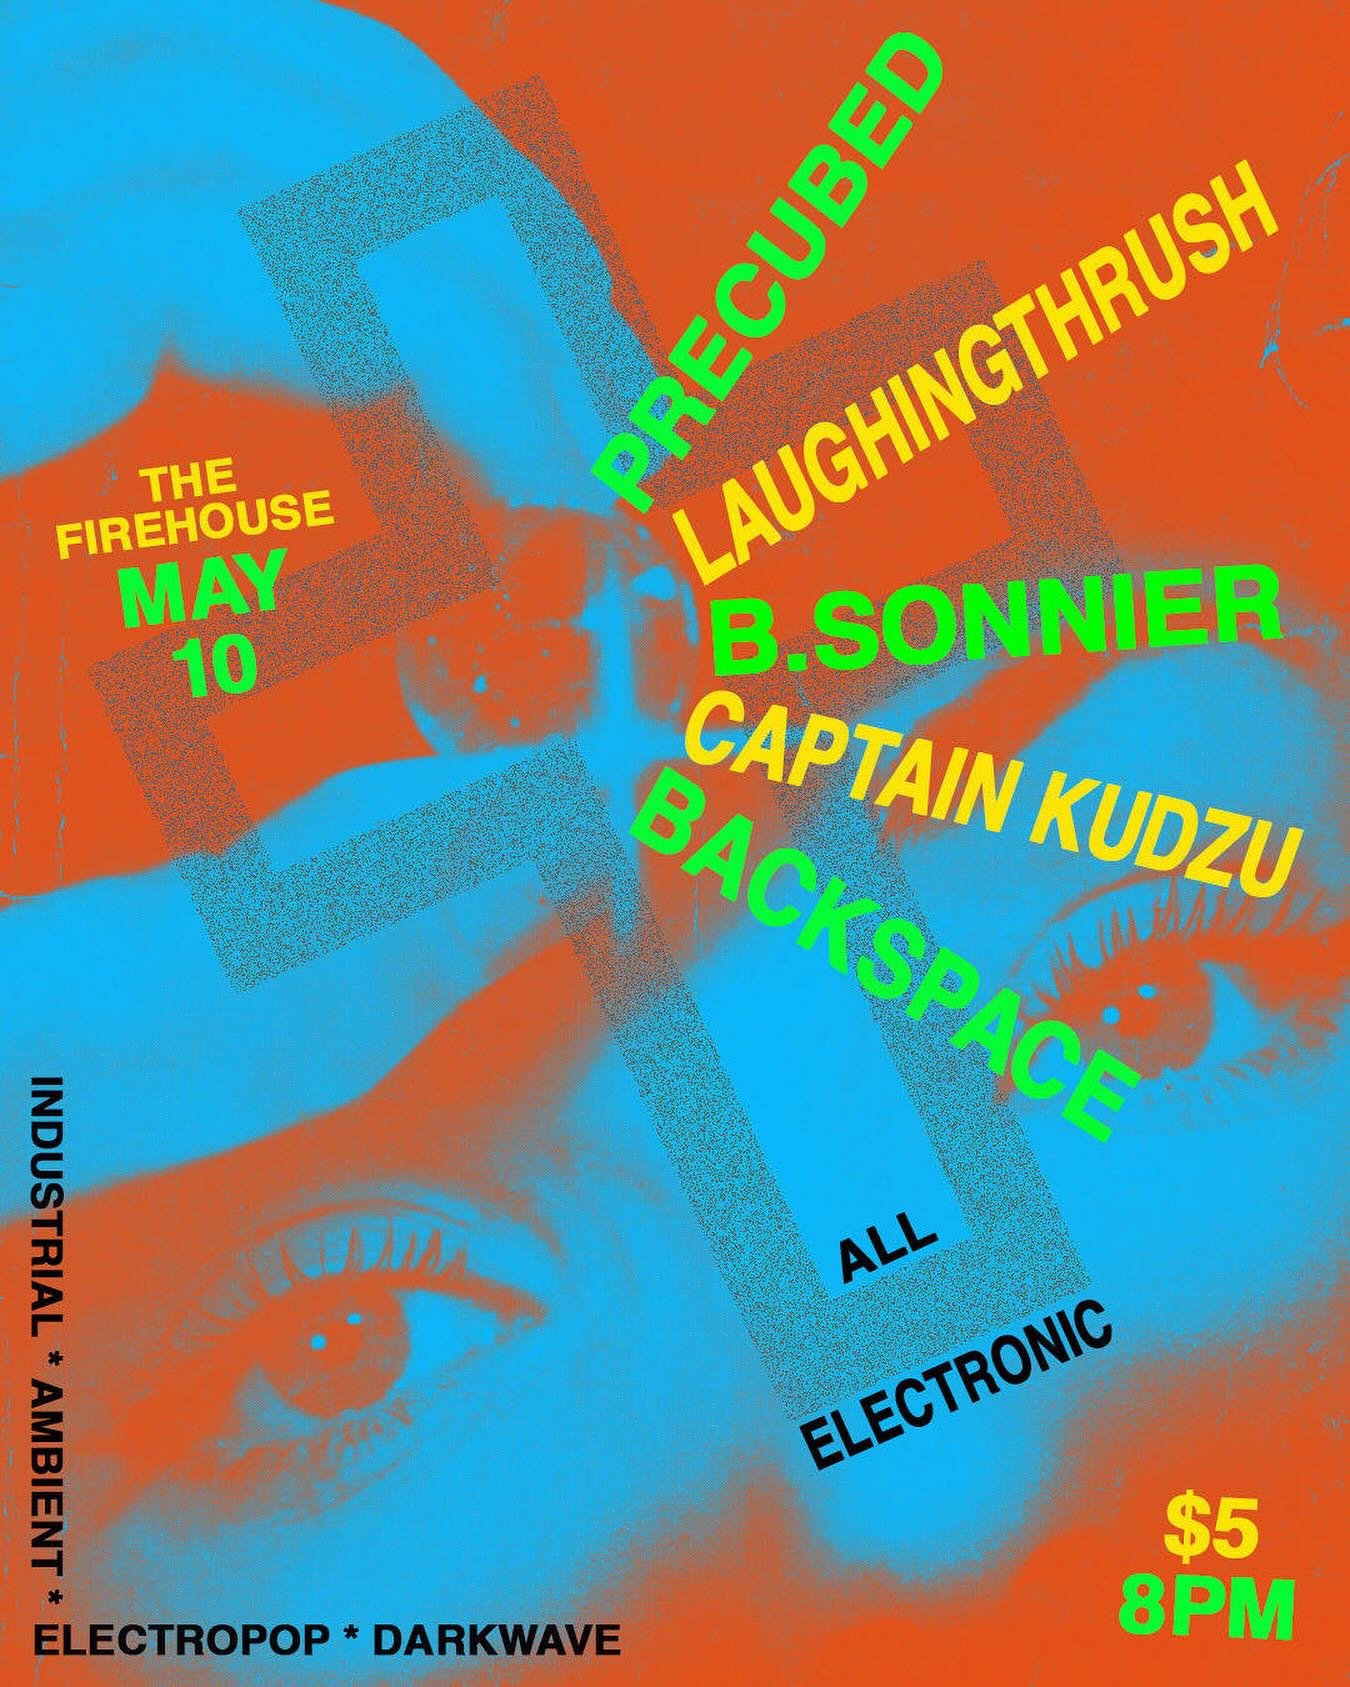 This Friday! See @precubedmusic laughingthrush, @b.sonnier.exbs @captain.kudzu and @_backspace_music ! 

No booze, respect the space!